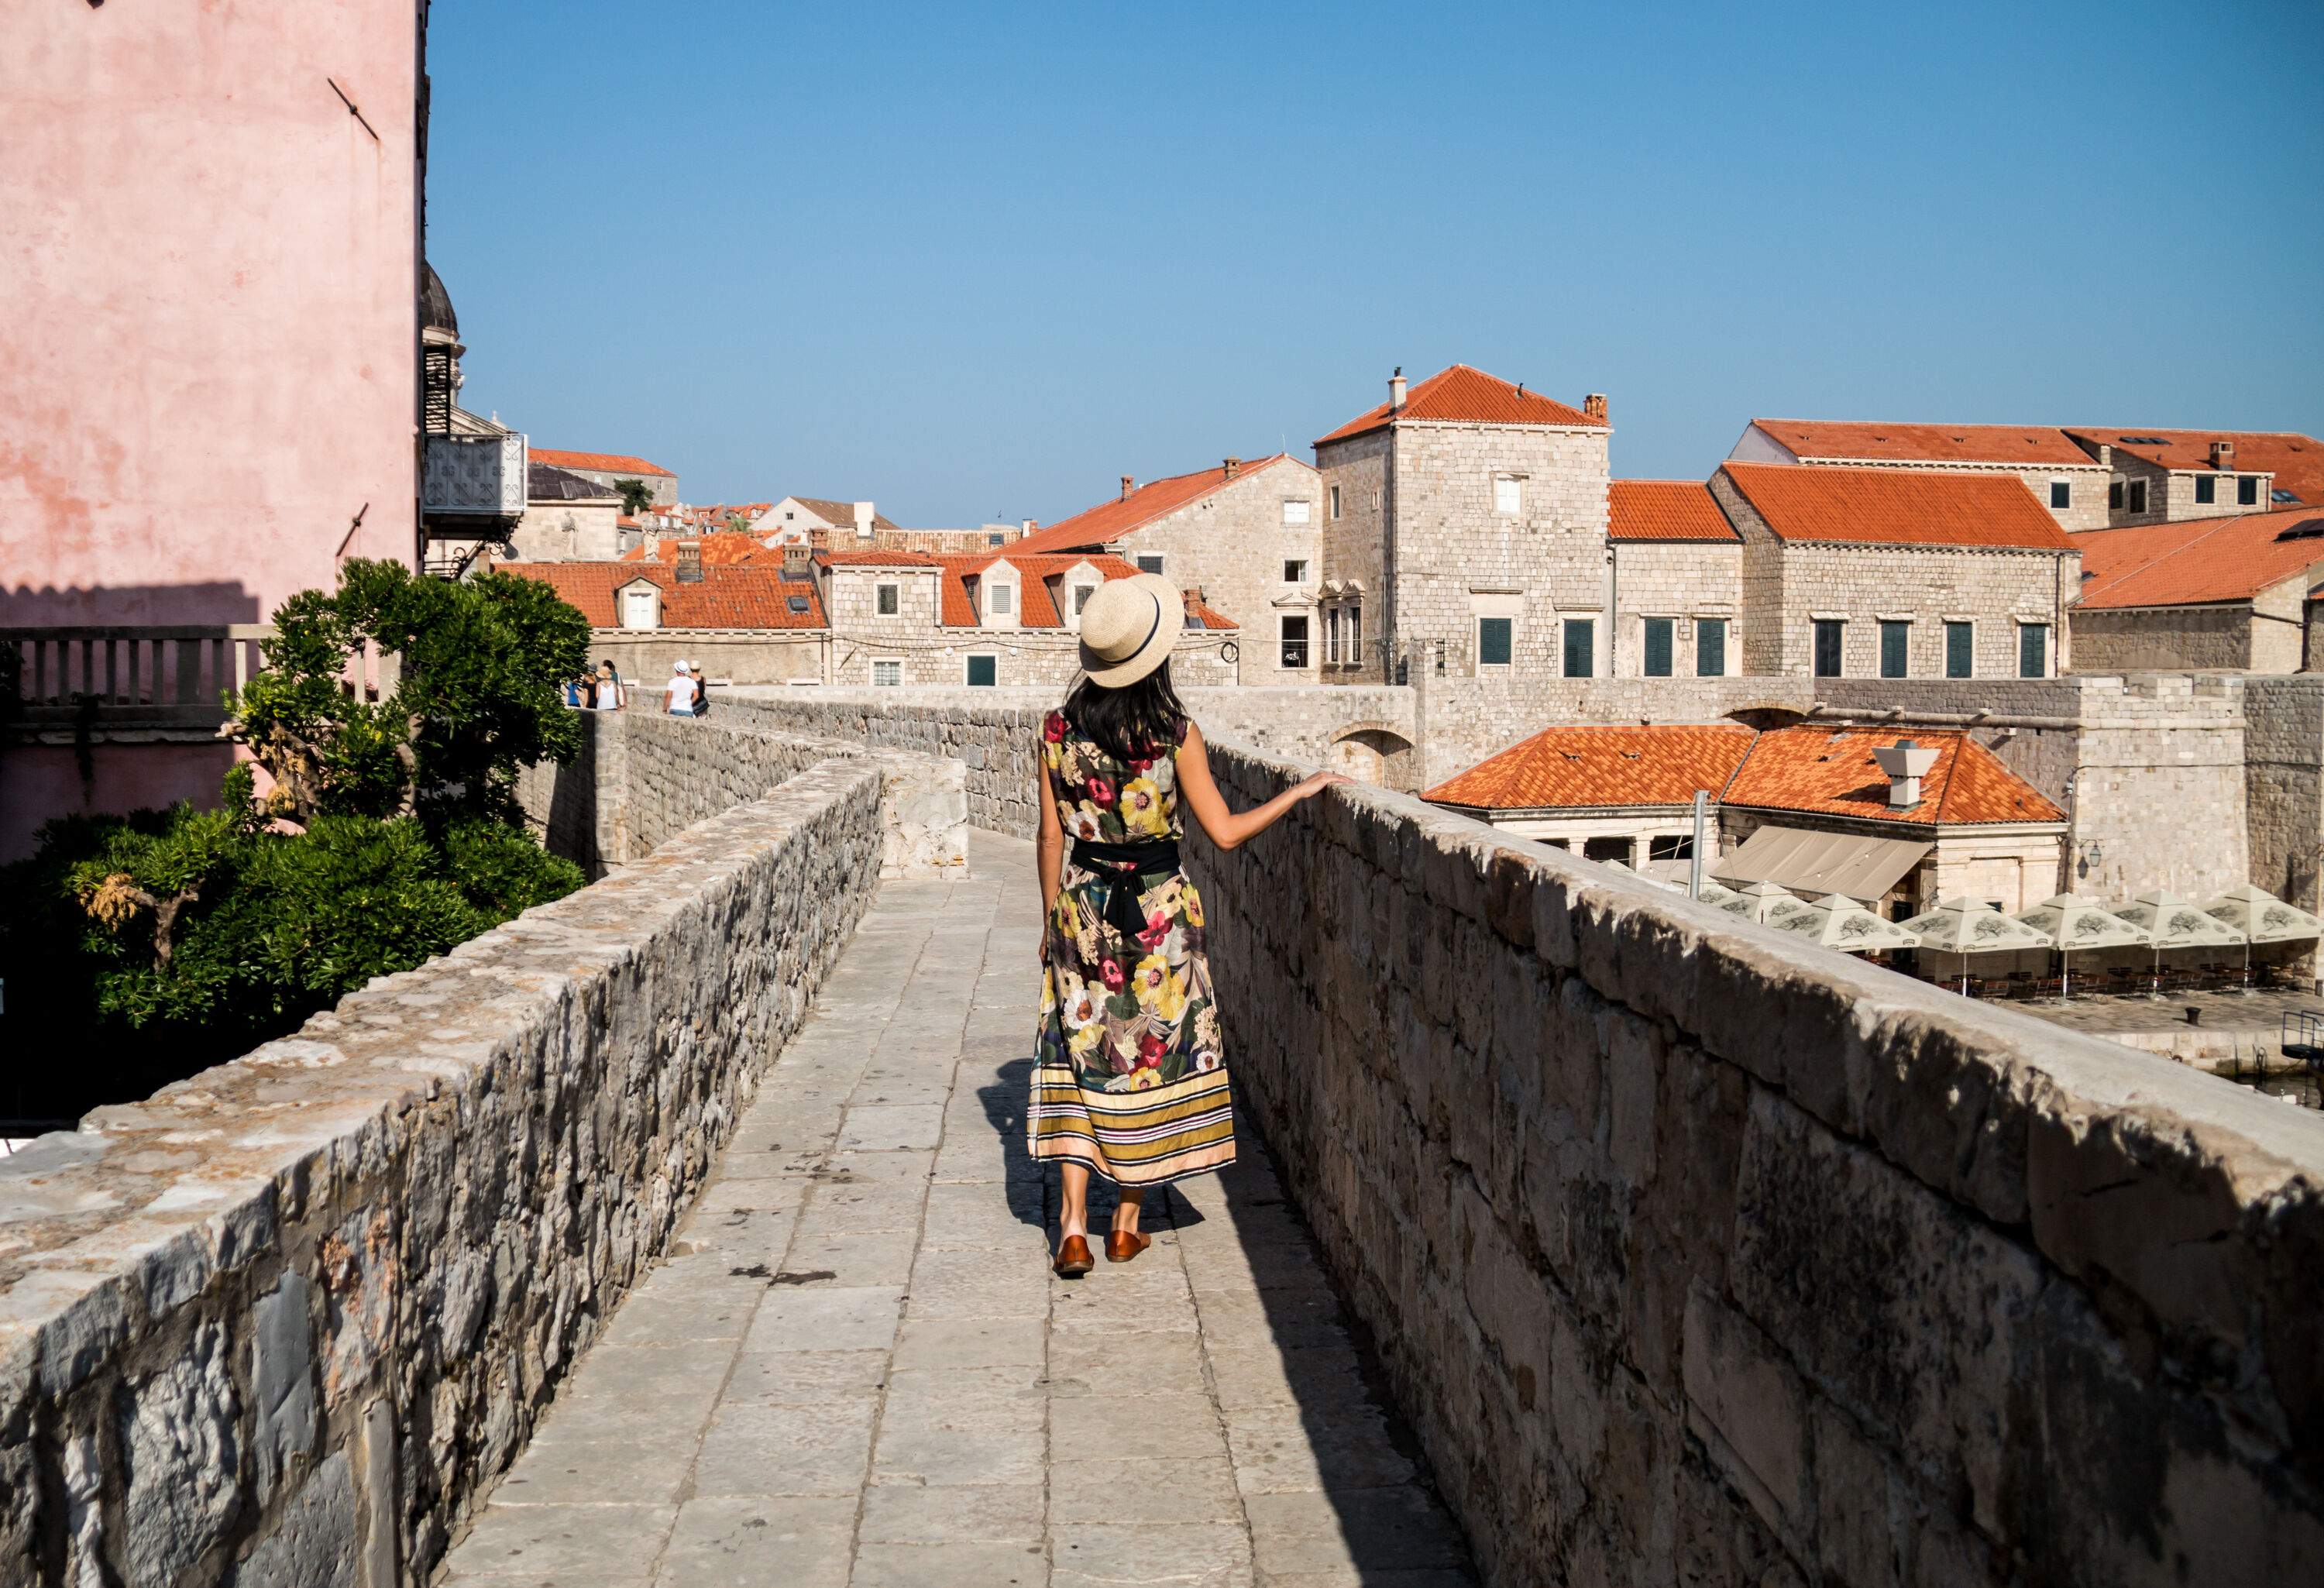 A woman leisurely strolls along the historic Walls of Dubrovnik, with stone buildings as a picturesque backdrop.